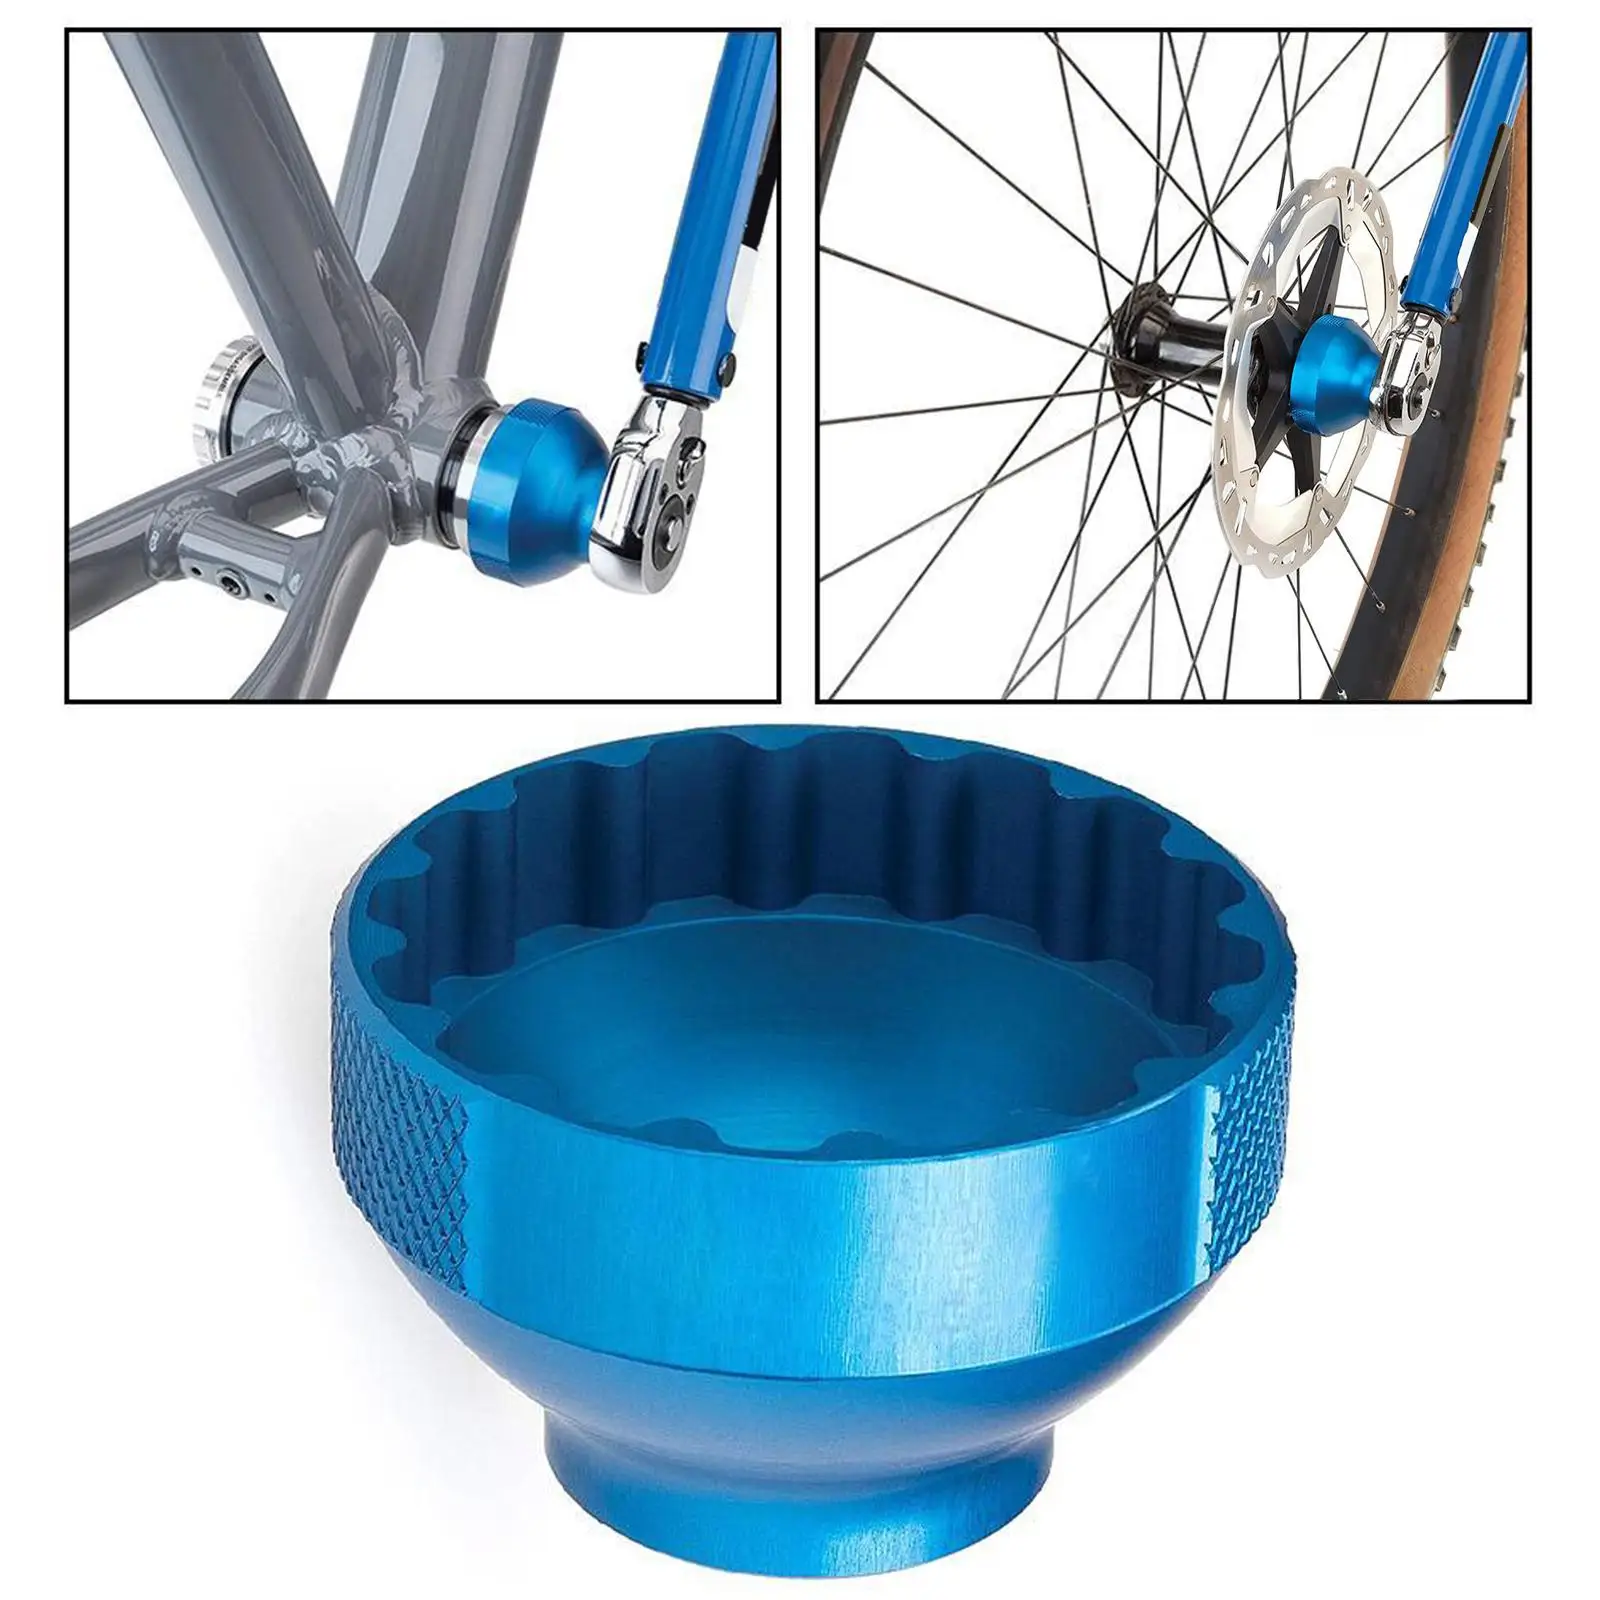 1x Bbt-69.2 16-Notch Accessories Durable Repair 44mm Removal Bottom Bracket Tool for Bicycle Repair Shop Traveling Cycling Bike